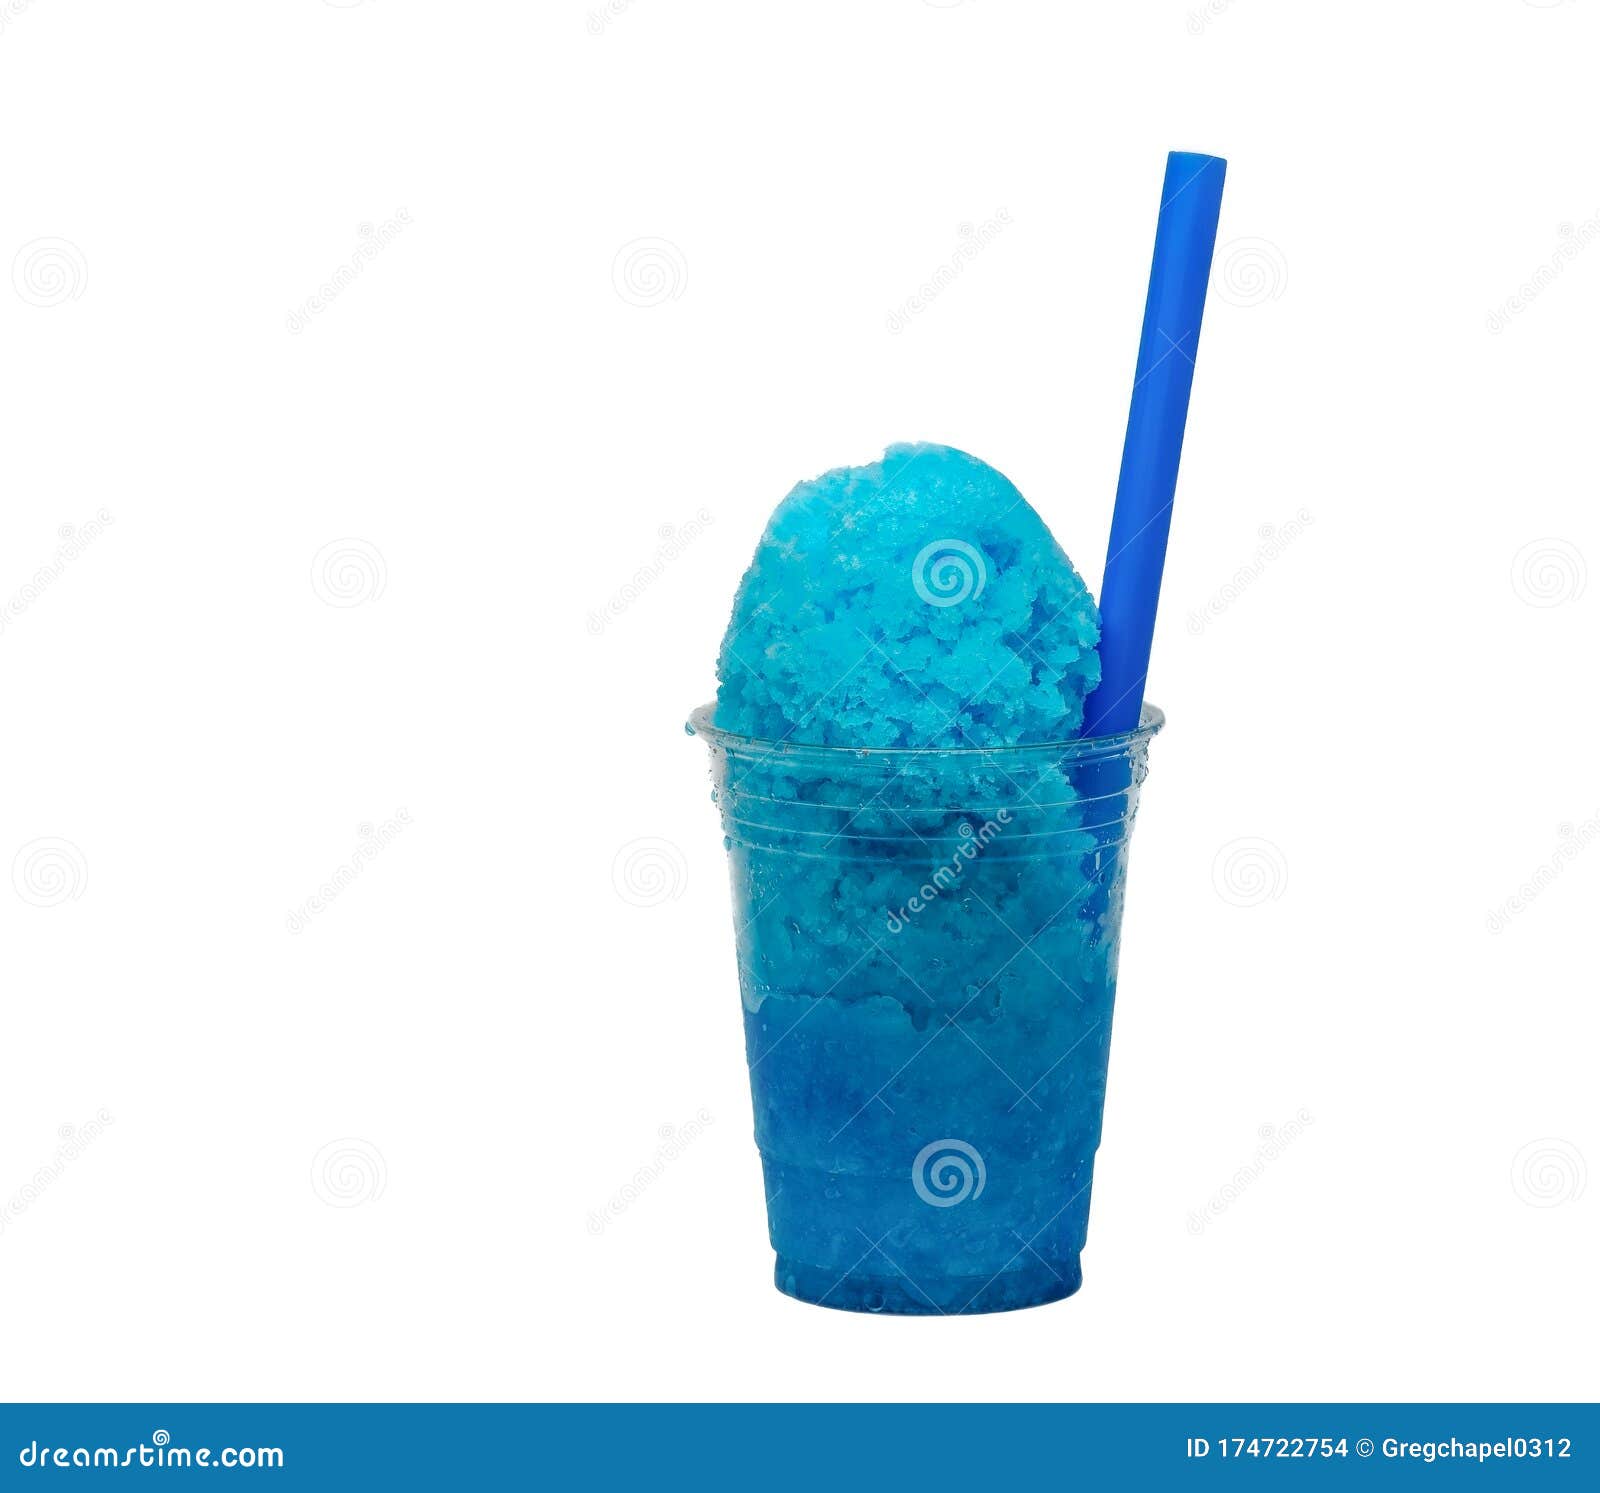 blue hawaiian shave ice, shaved ice or snow cone dessert with a blue straw.